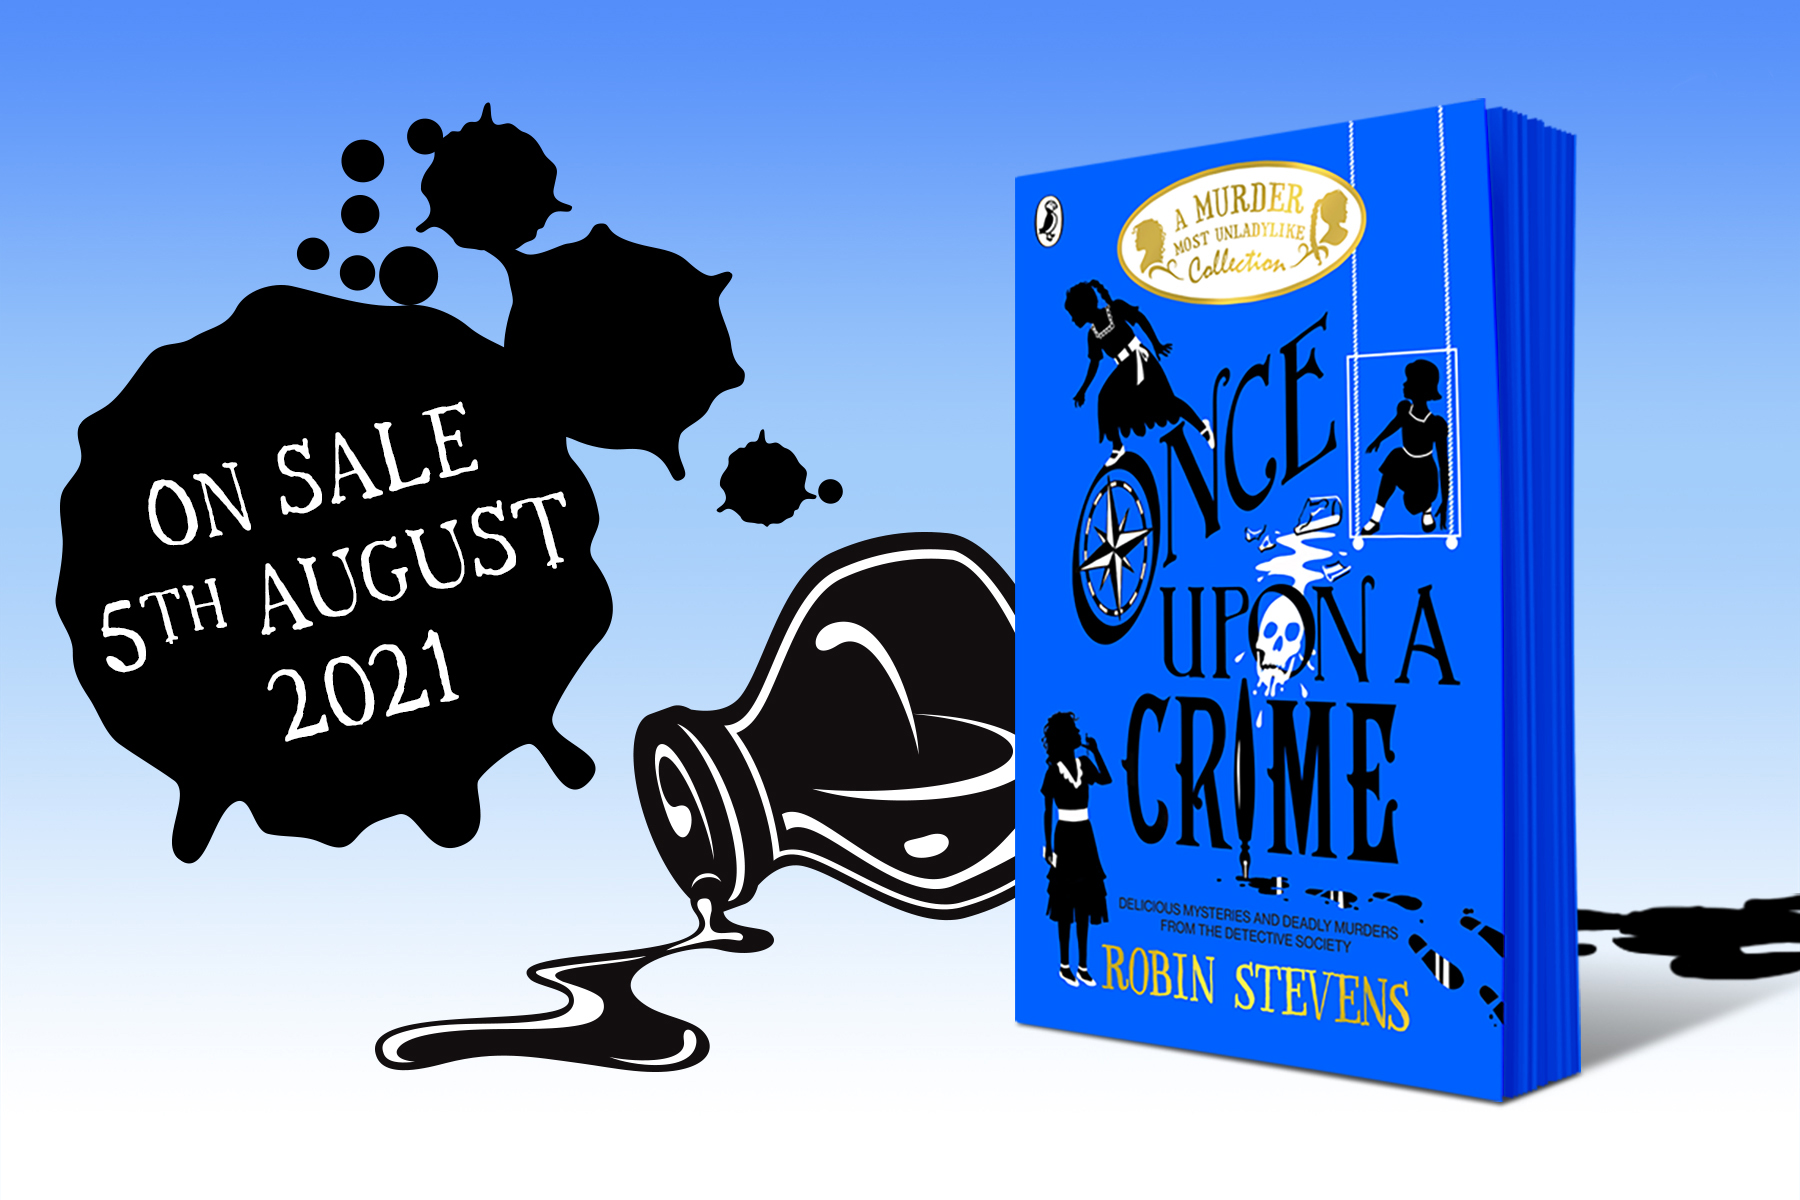 A photo of Robin Stevens' new book Once Upon a Crime. The book cover is a bright royal blue with black lettering. The background is ombre from blue to white and there is an illustration of an ink bottle that has spilled over and in the big splotch it says 'On sale 5th August 2021'